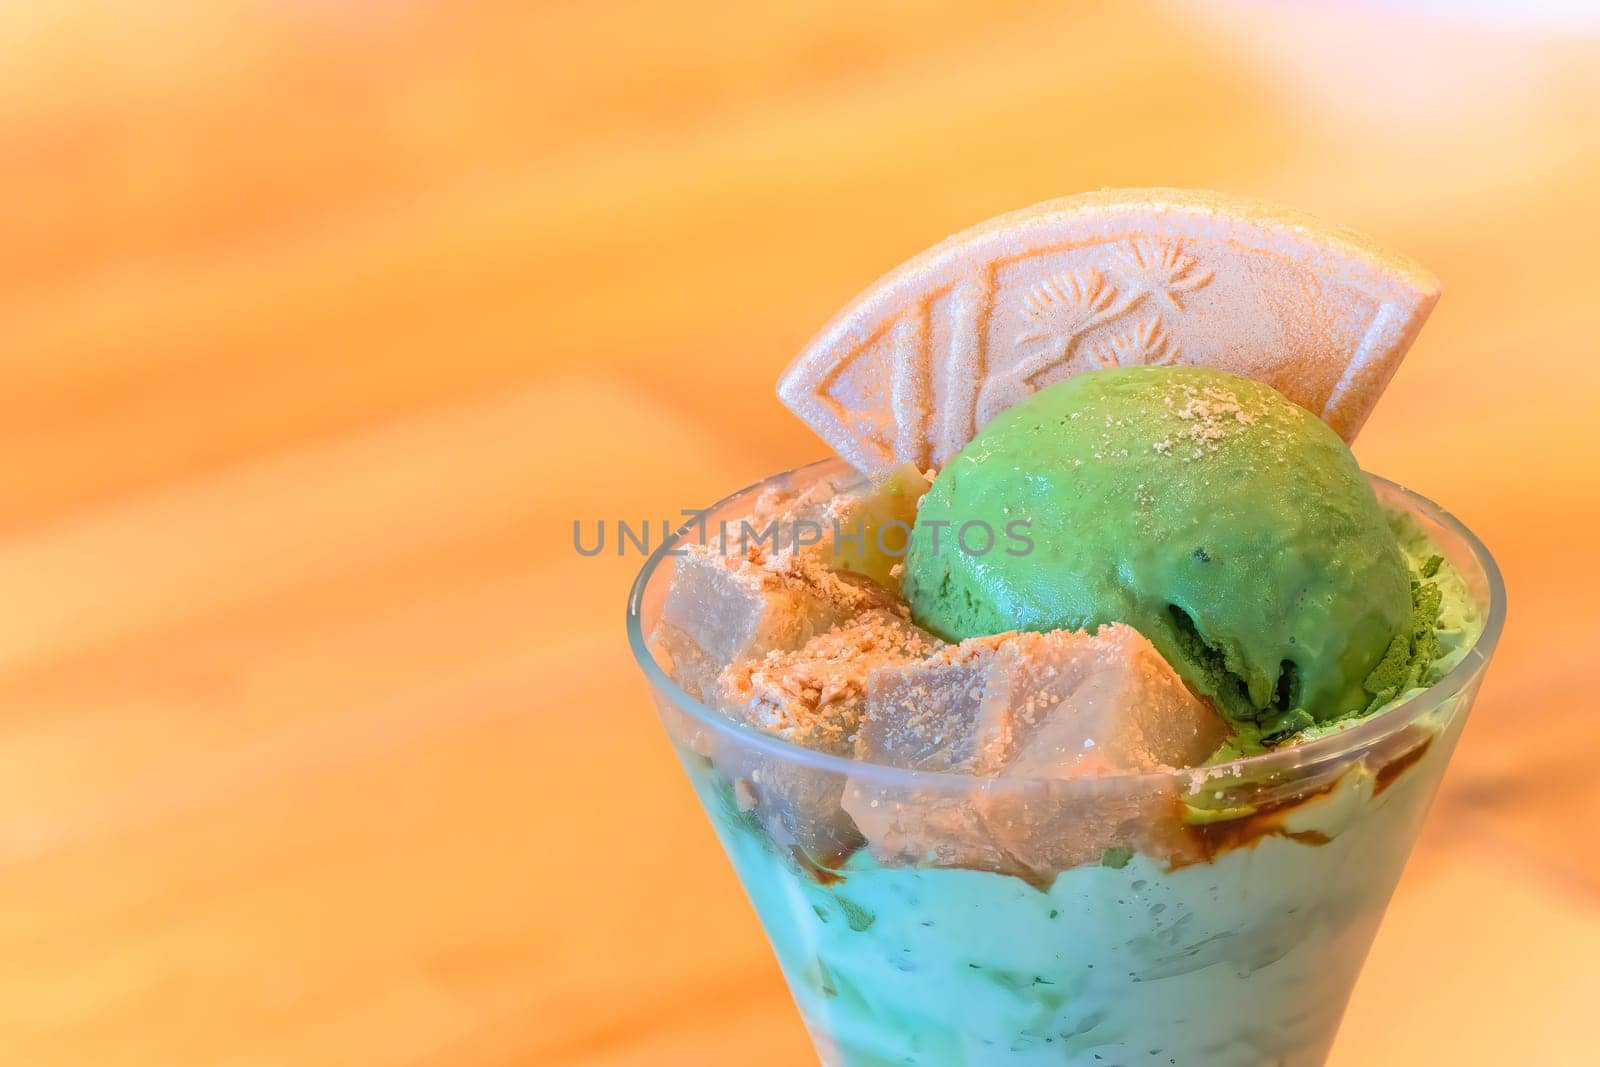 A traditional Japanese dessert matcha ice cream parfait with cubes of agar jelly sprinkled with roasted soybean flour called kinako powder and a higashi mochi wafer featuring a pine motif.